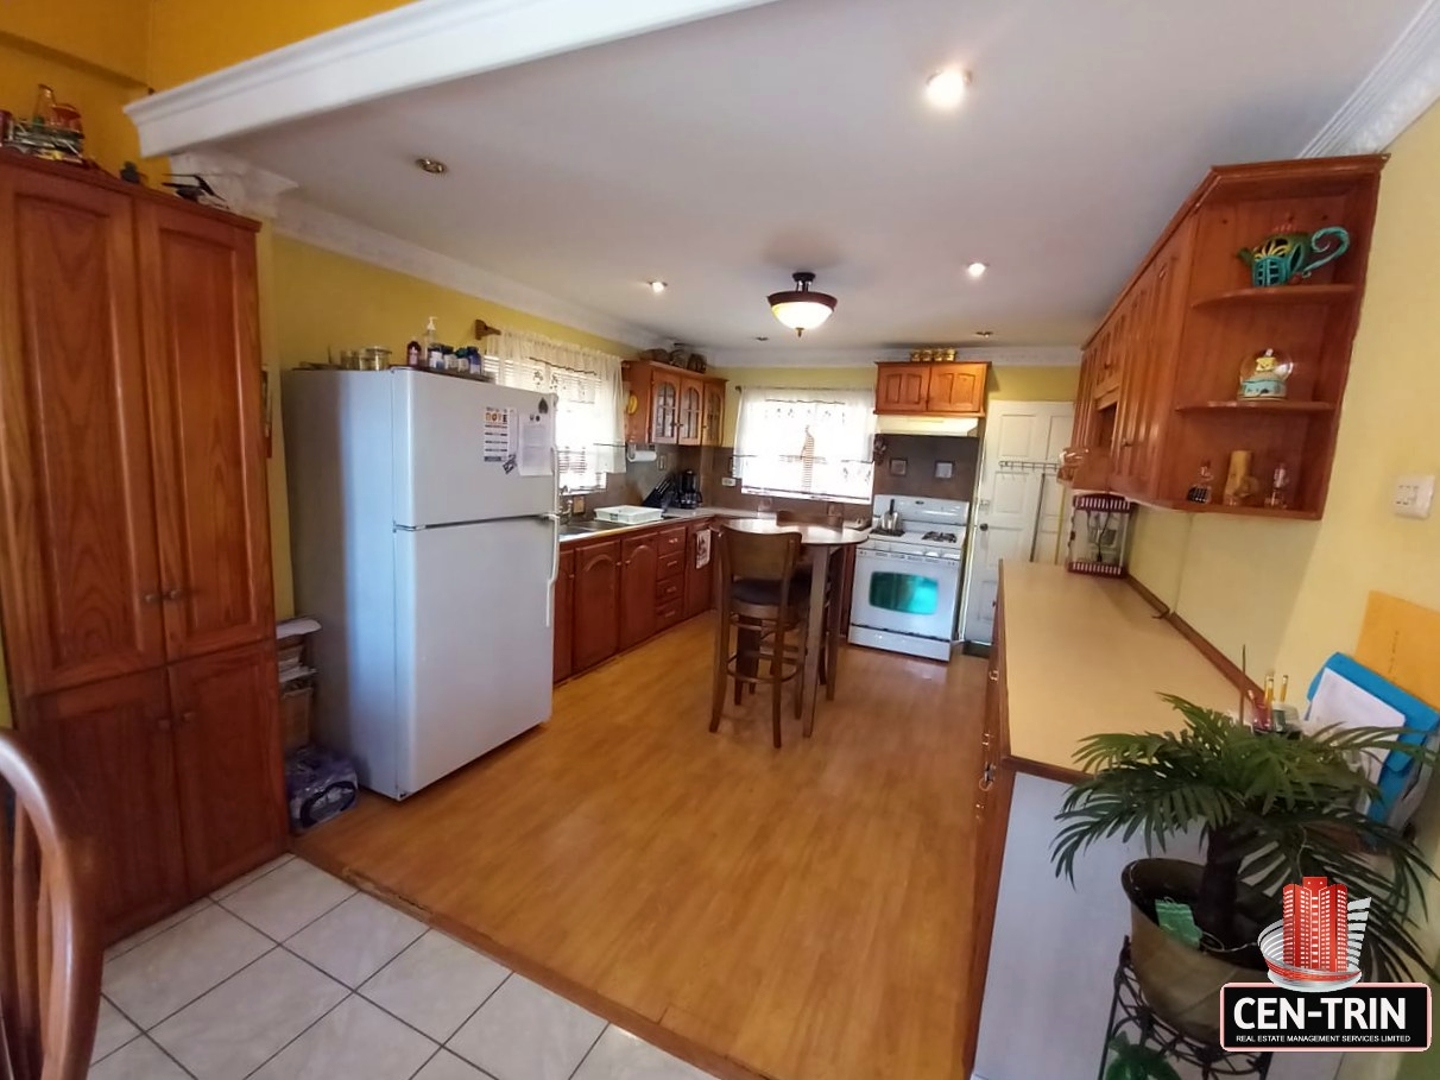 A kitchen with a refrigerator, stove, and table in a 3-bedroom house for sale.